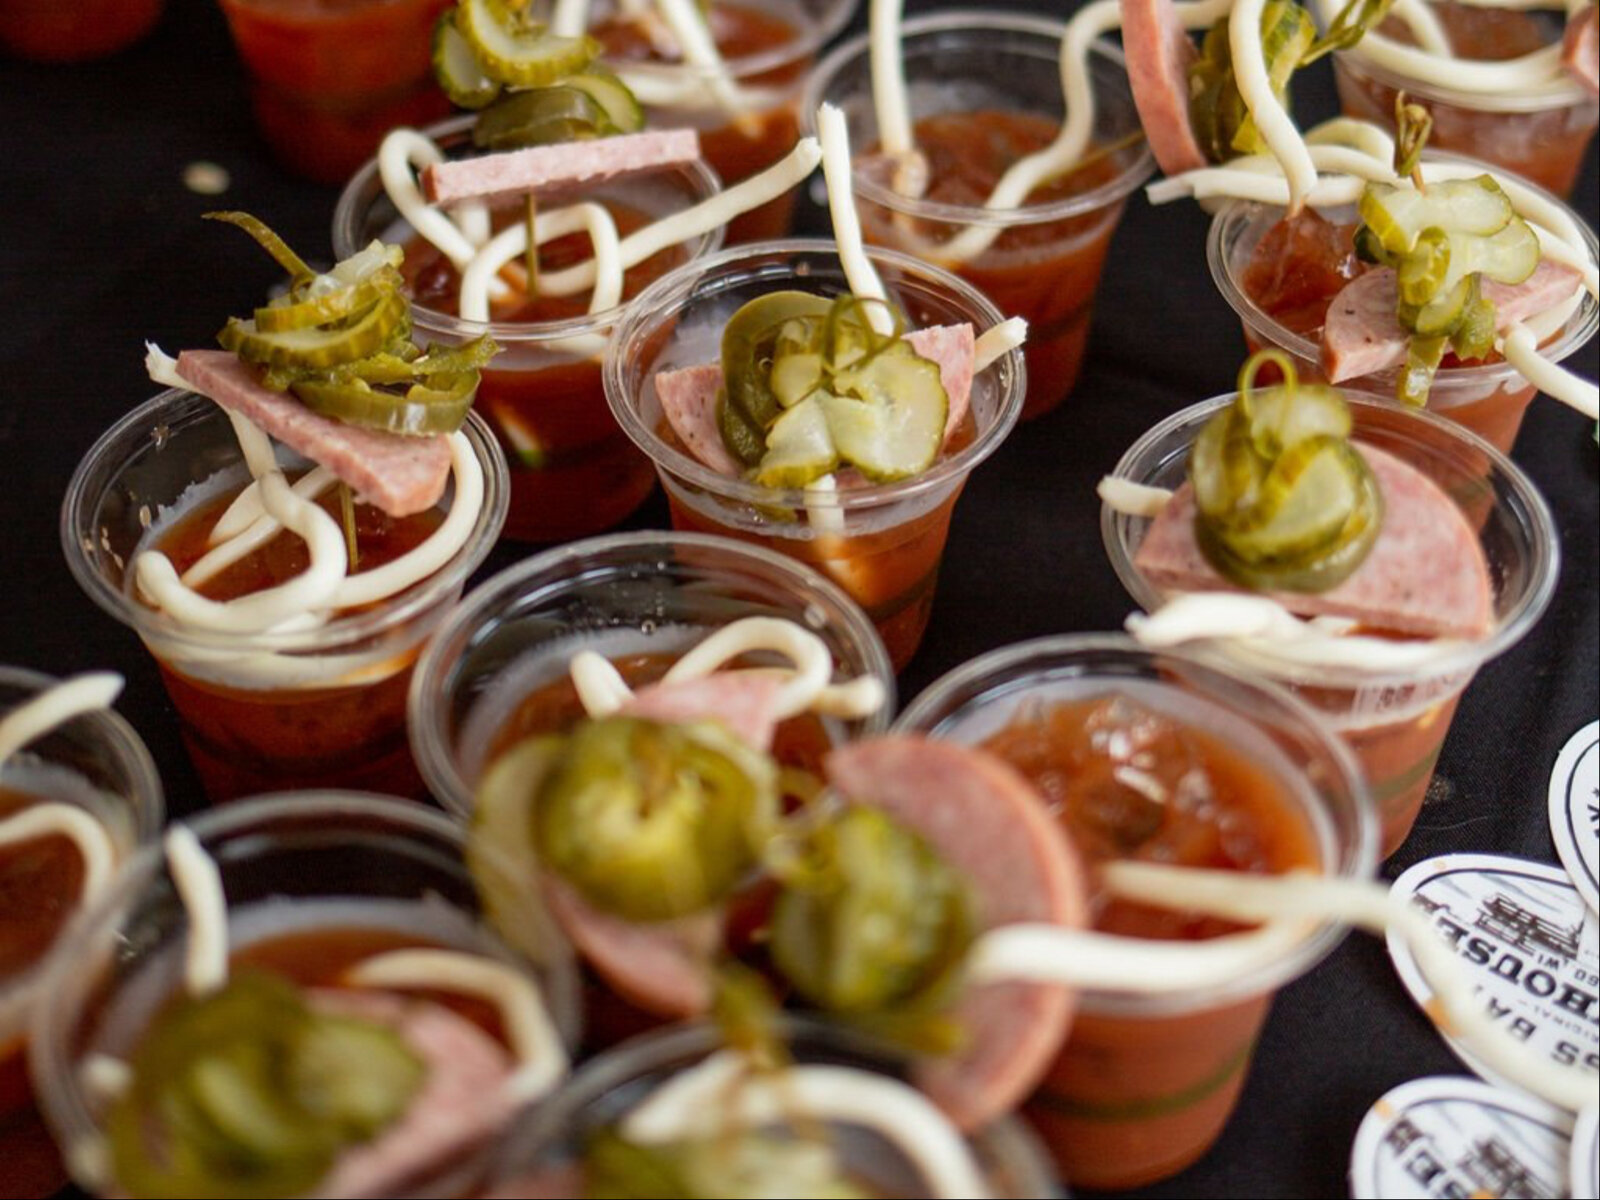 Bloody Mary Festival will serve up another round this summer, but in a